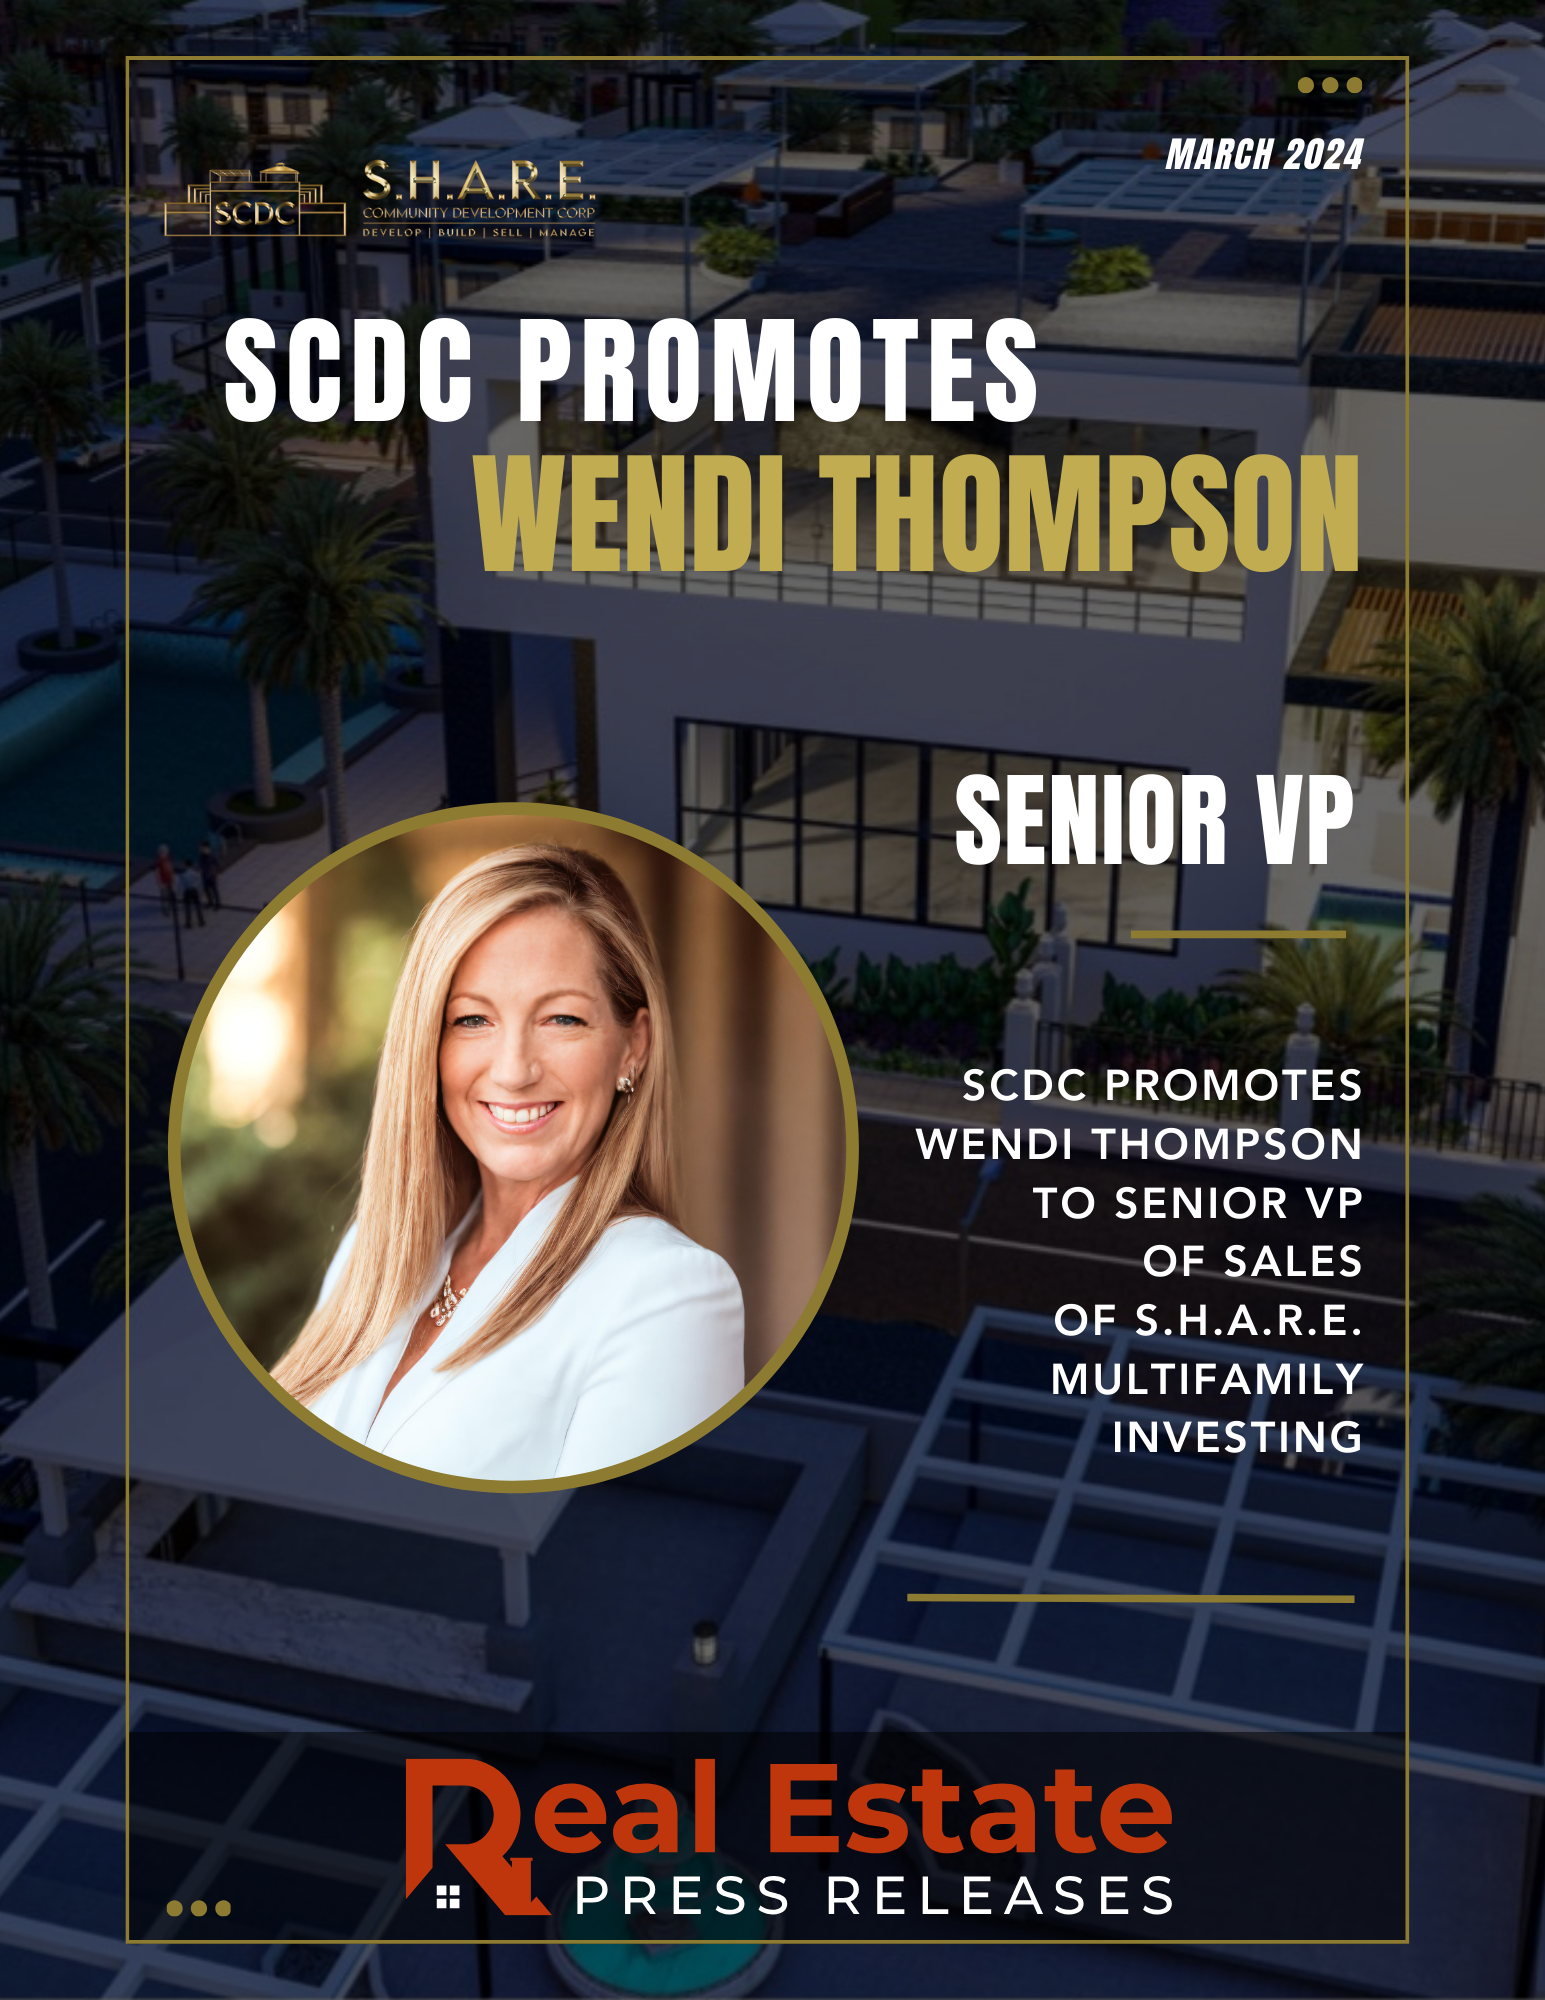 SCDC Promotes Wendi Thompson to Senior Vice President of Sales at S.H.A.R.E. Multifamily Investments